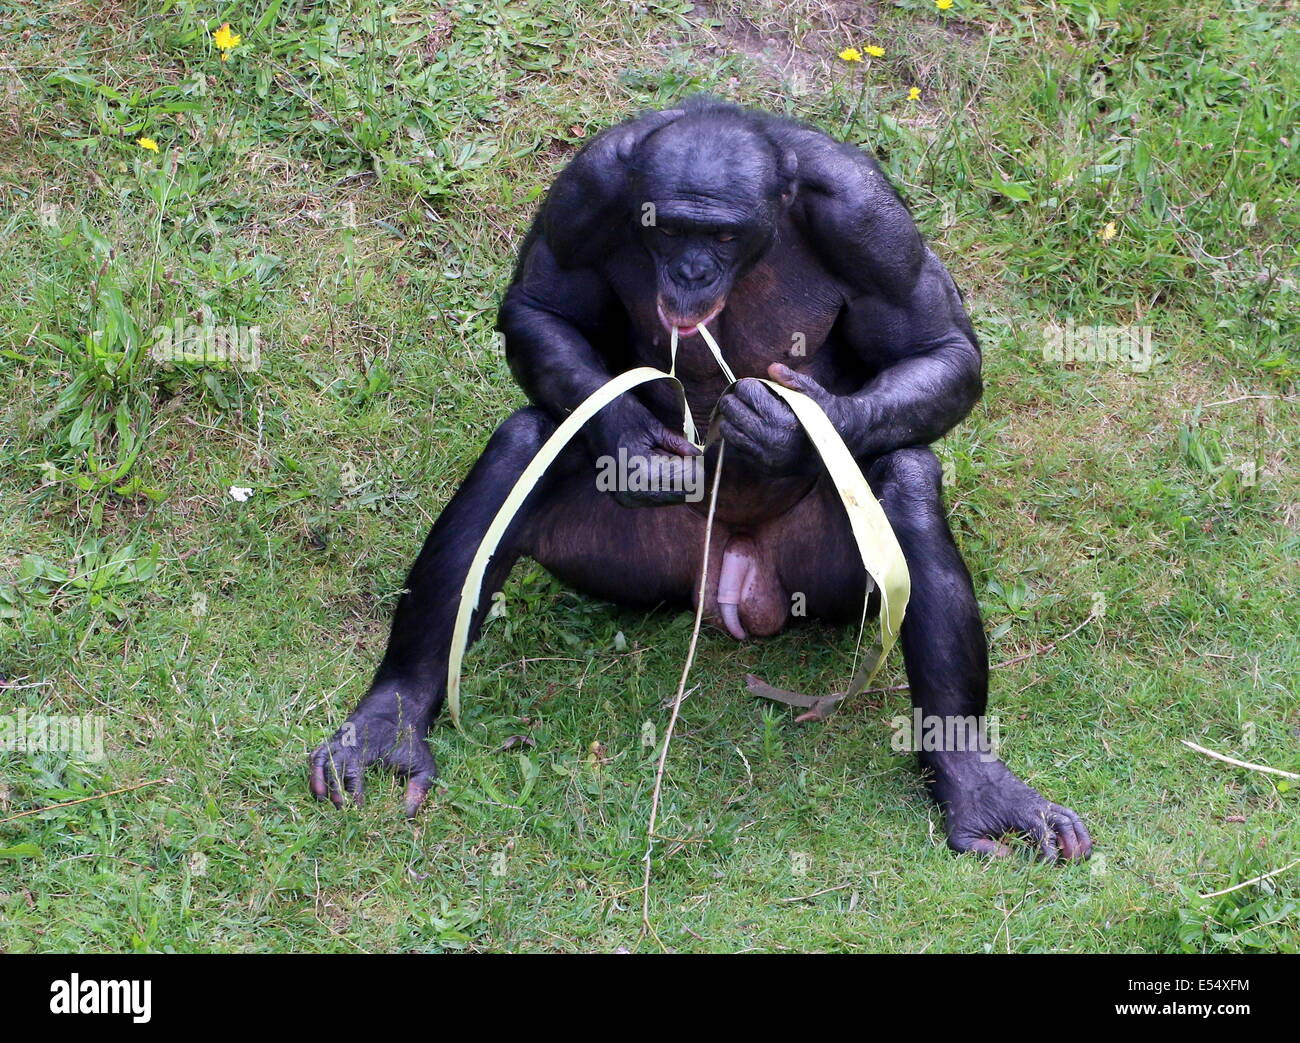 Mature male Bonobo or (formerly) Pygmy Chimpanzee (Pan Paniscus) in a  natural setting, showing an erect penis while eating Stock Photo - Alamy